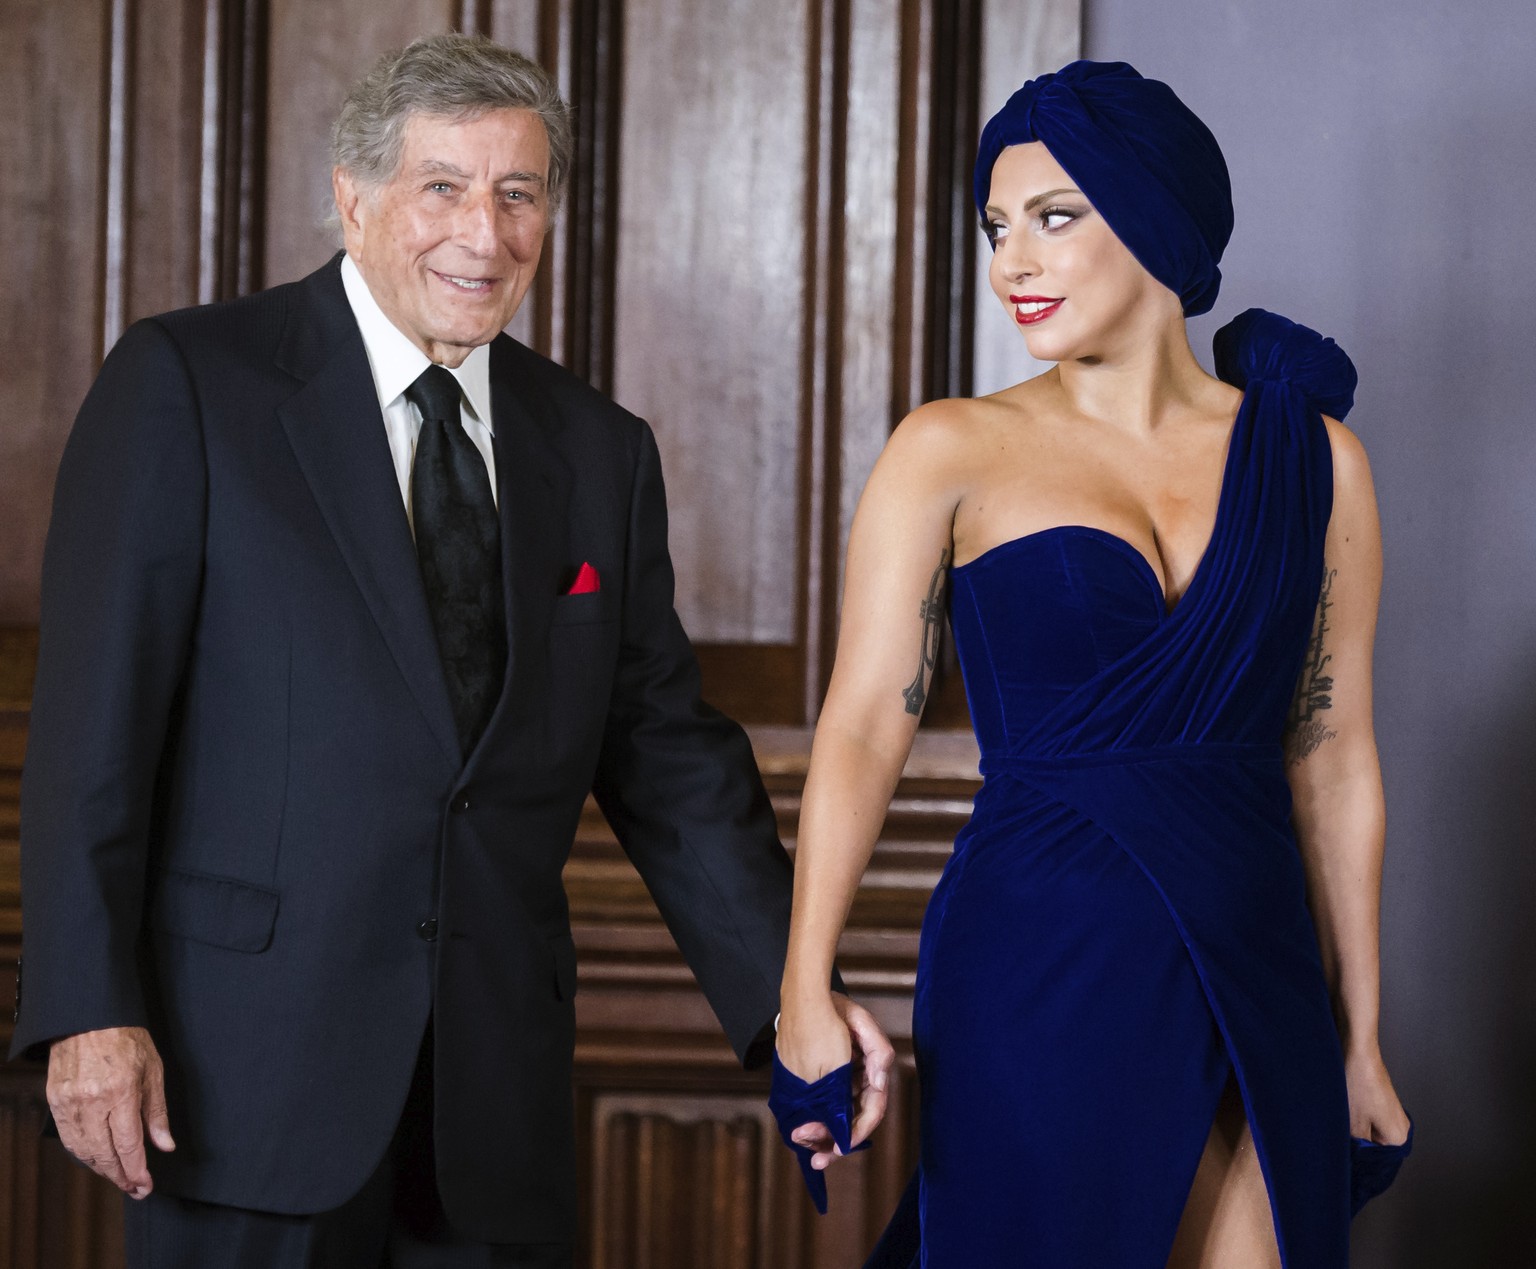 FILE- Tony Bennett, left, and Lady Gaga appear for a media event at city hall in Brussels on Sept. 22, 2014. Bennett died Friday, July 21, 2023. at age 96. (AP Photo/Geert Vanden Wijngaert, File)